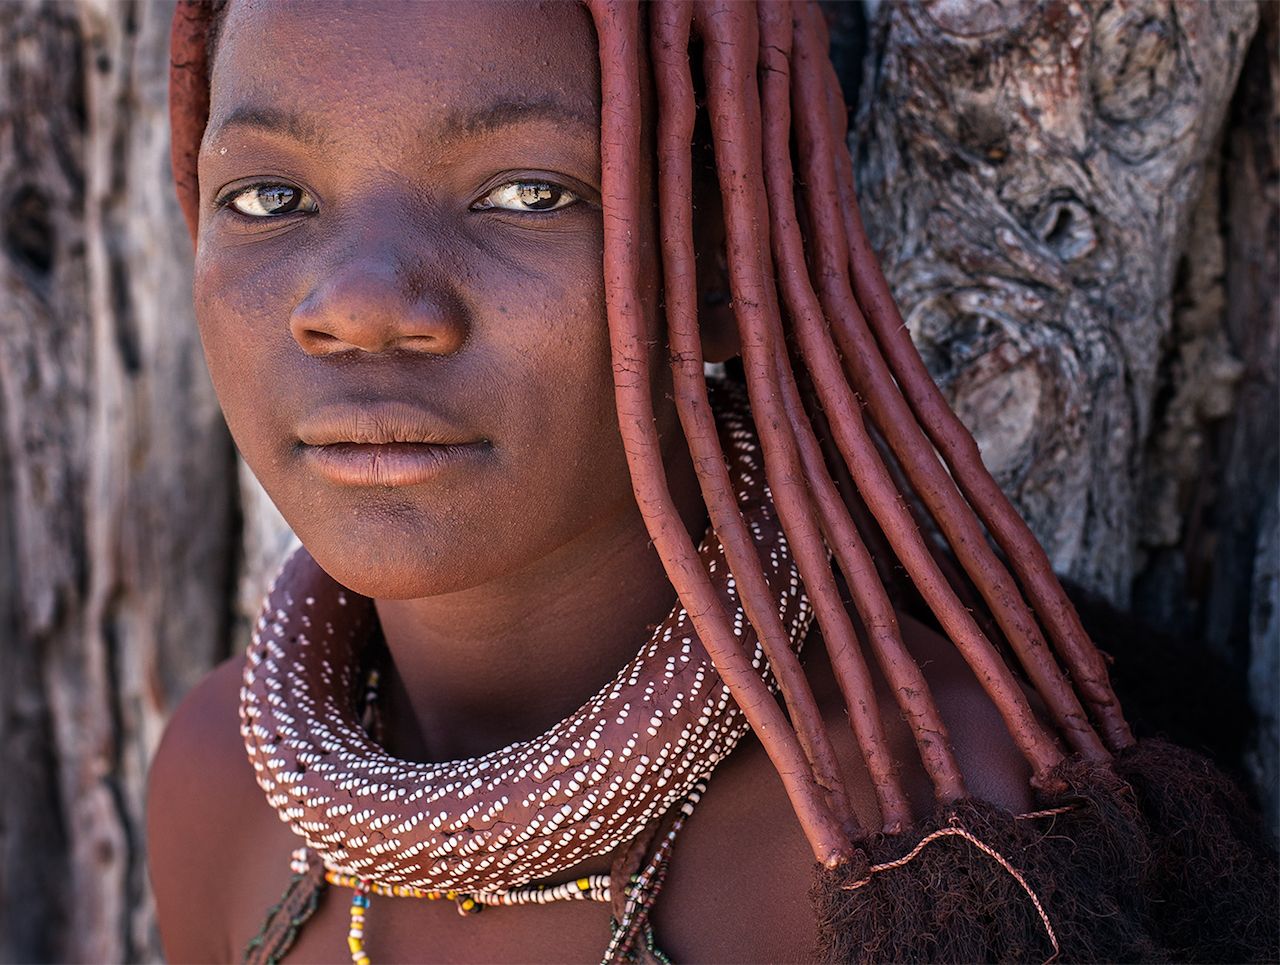 Himba boy, Namibia. A young Himba boy with traditional 